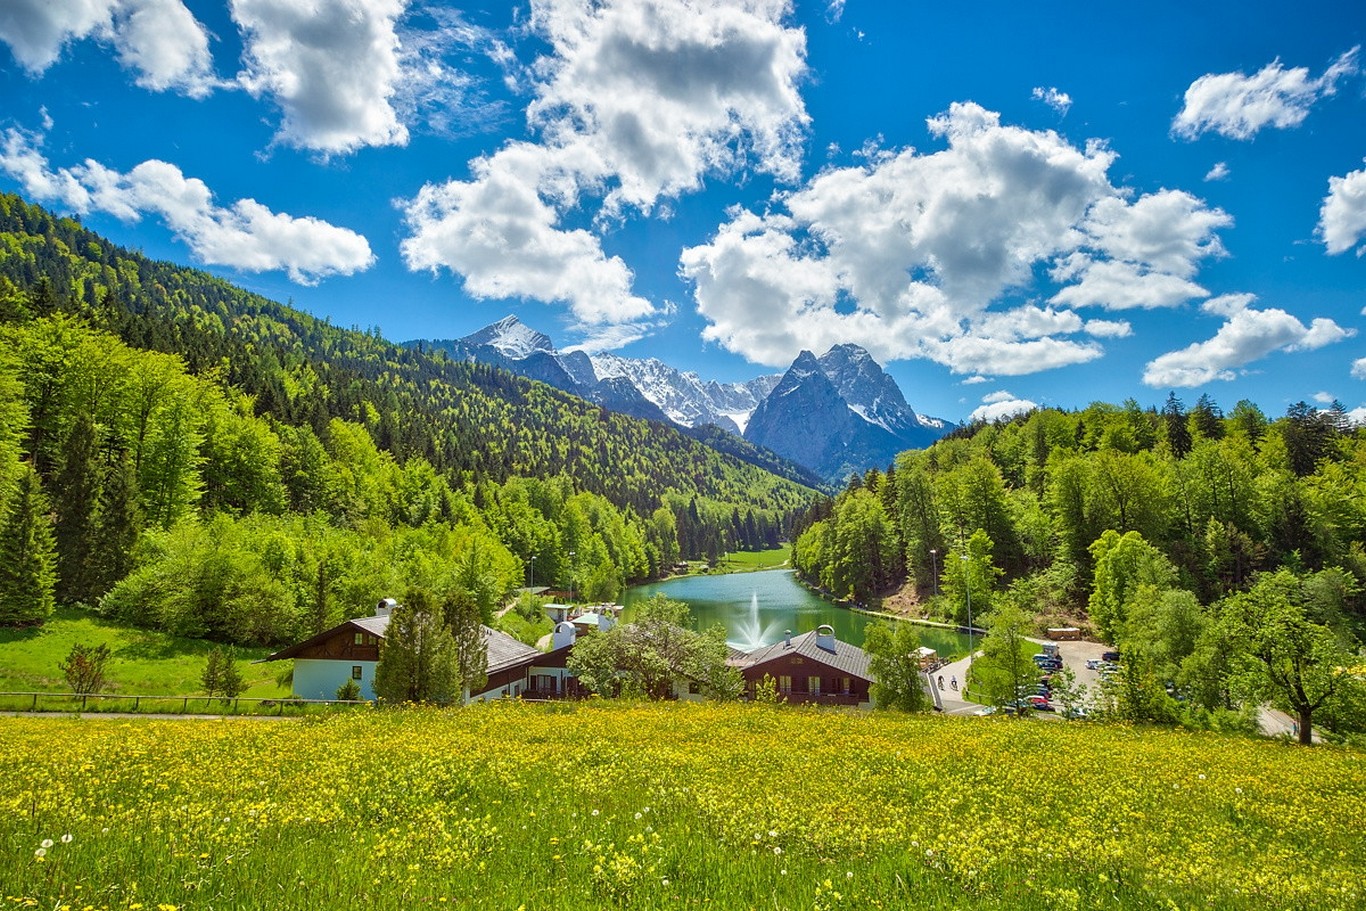 Lake Germany Summer Clouds Green House Wildflowers Mountains Forest Nature Landscape Field 1366x911